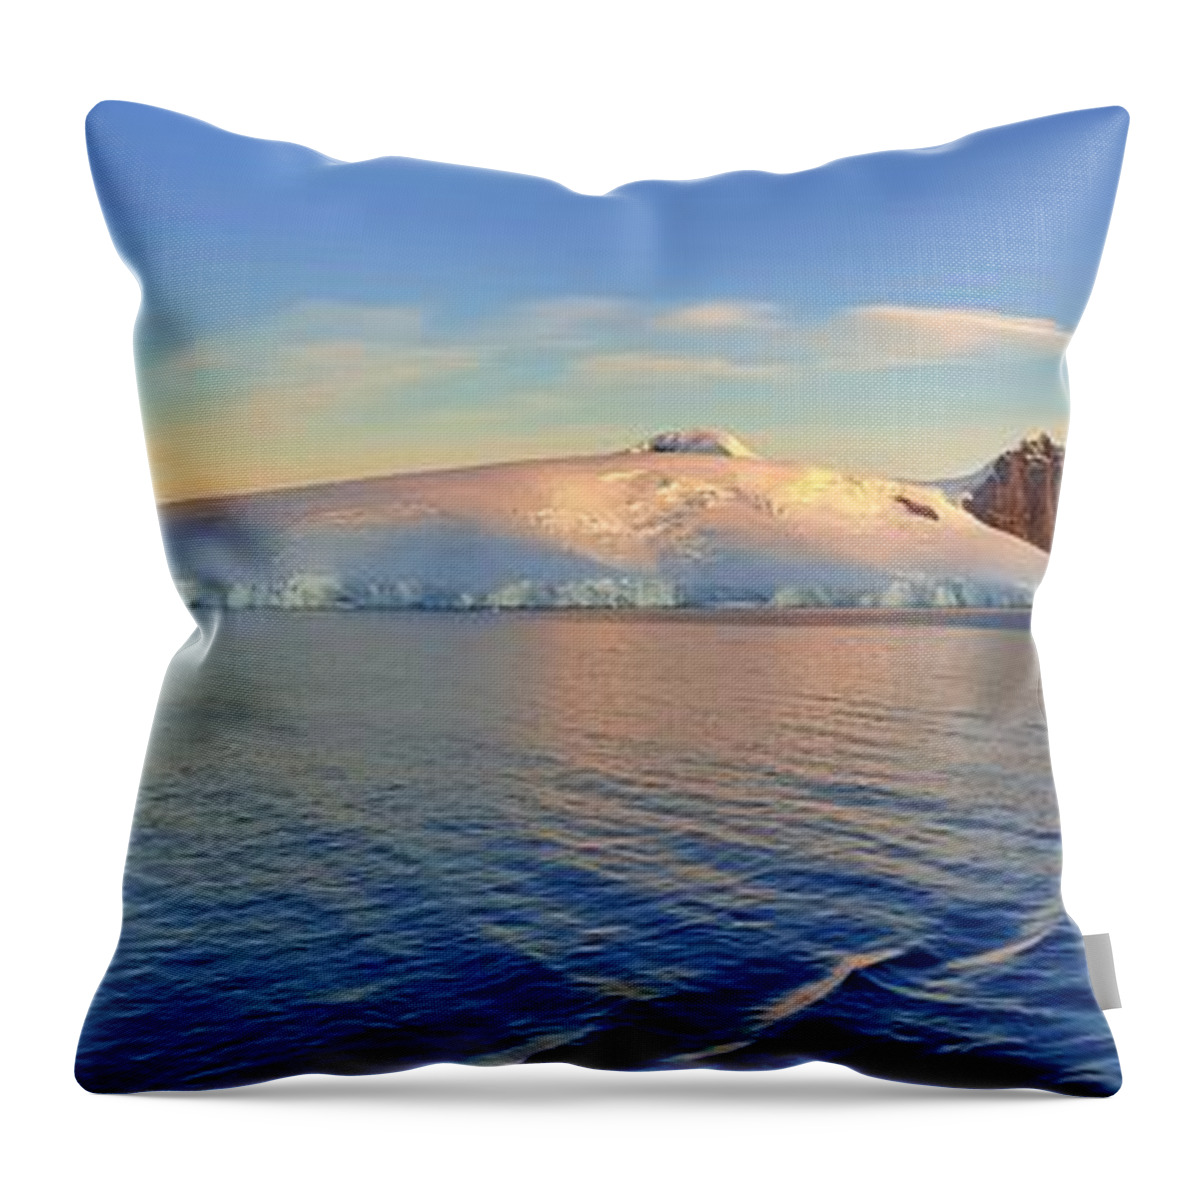 Antarctica Throw Pillow featuring the photograph Antarctic Panorama by Andrea Whitaker